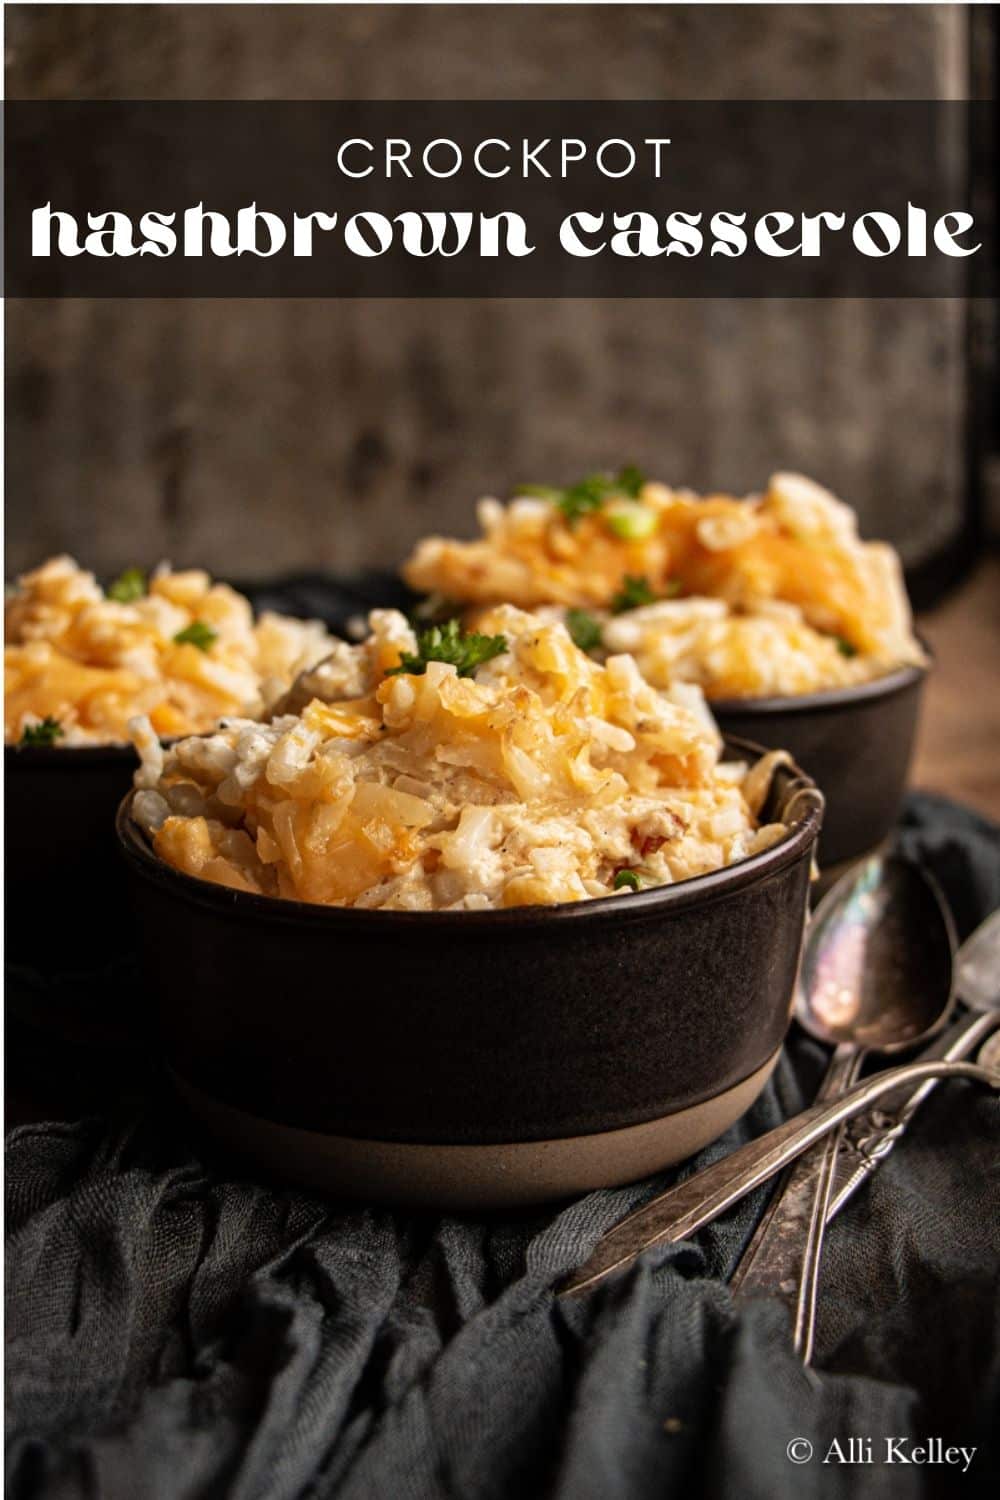 Crockpot hashbrown casserole is a dish the whole family will love! It's cheesy, comforting, and effortless to make. My easy hashbrown casserole is perfect for breakfast, brunch, or dinner – it's that versatile!